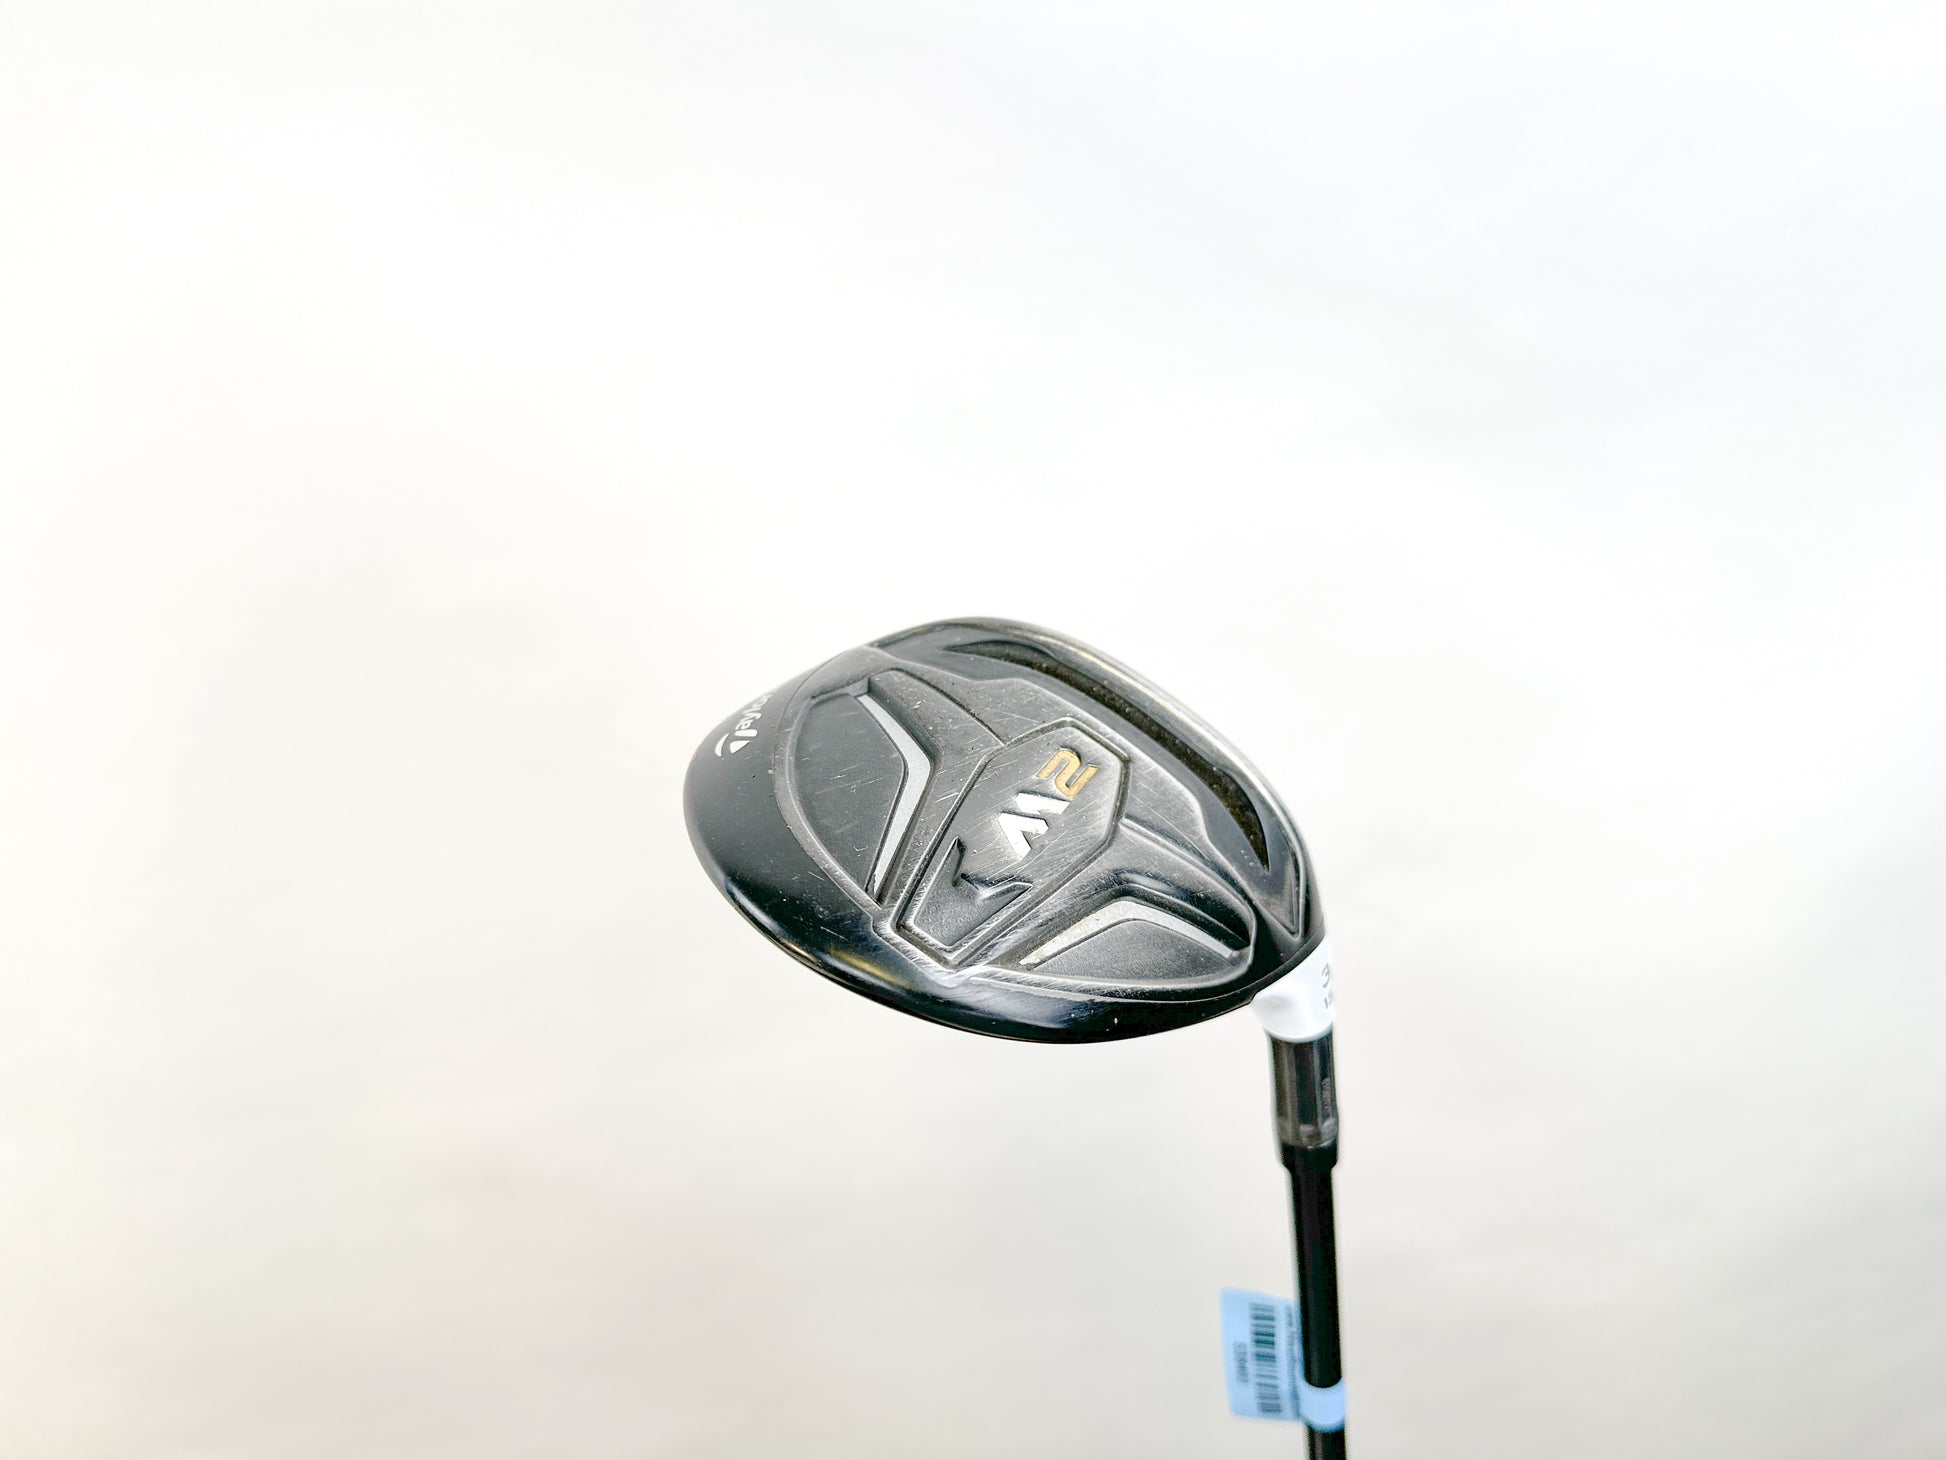 Used TaylorMade M2 3-Wood - Right-Handed - 15 Degrees - Stiff Flex-Next Round